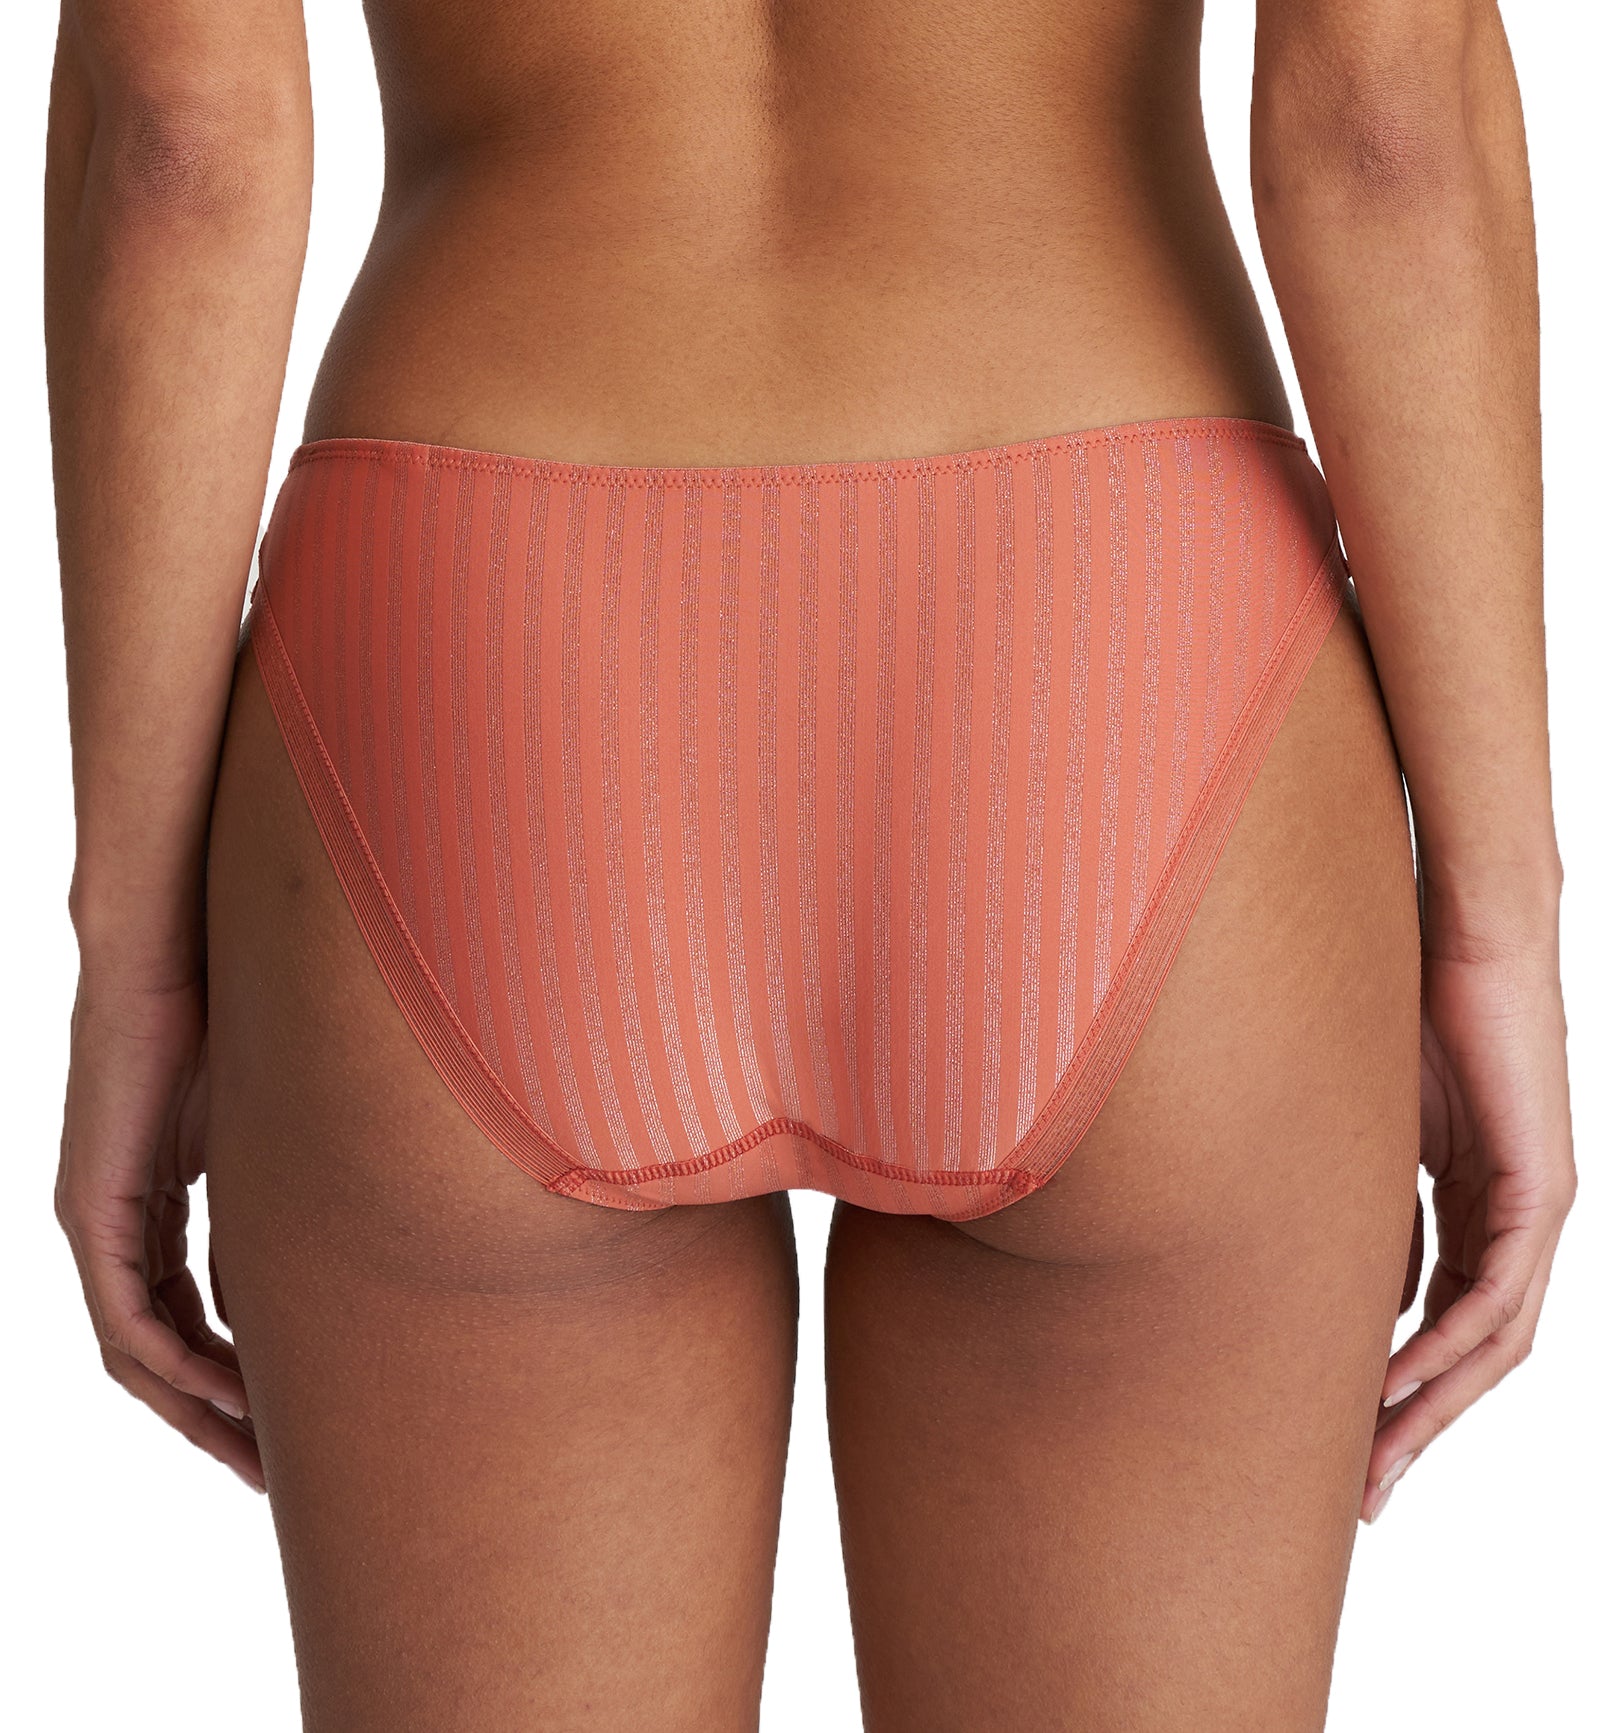 Marie Jo Tom Rio Brief (0520820),Small,Salted Caramel - Salted Caramel,Small